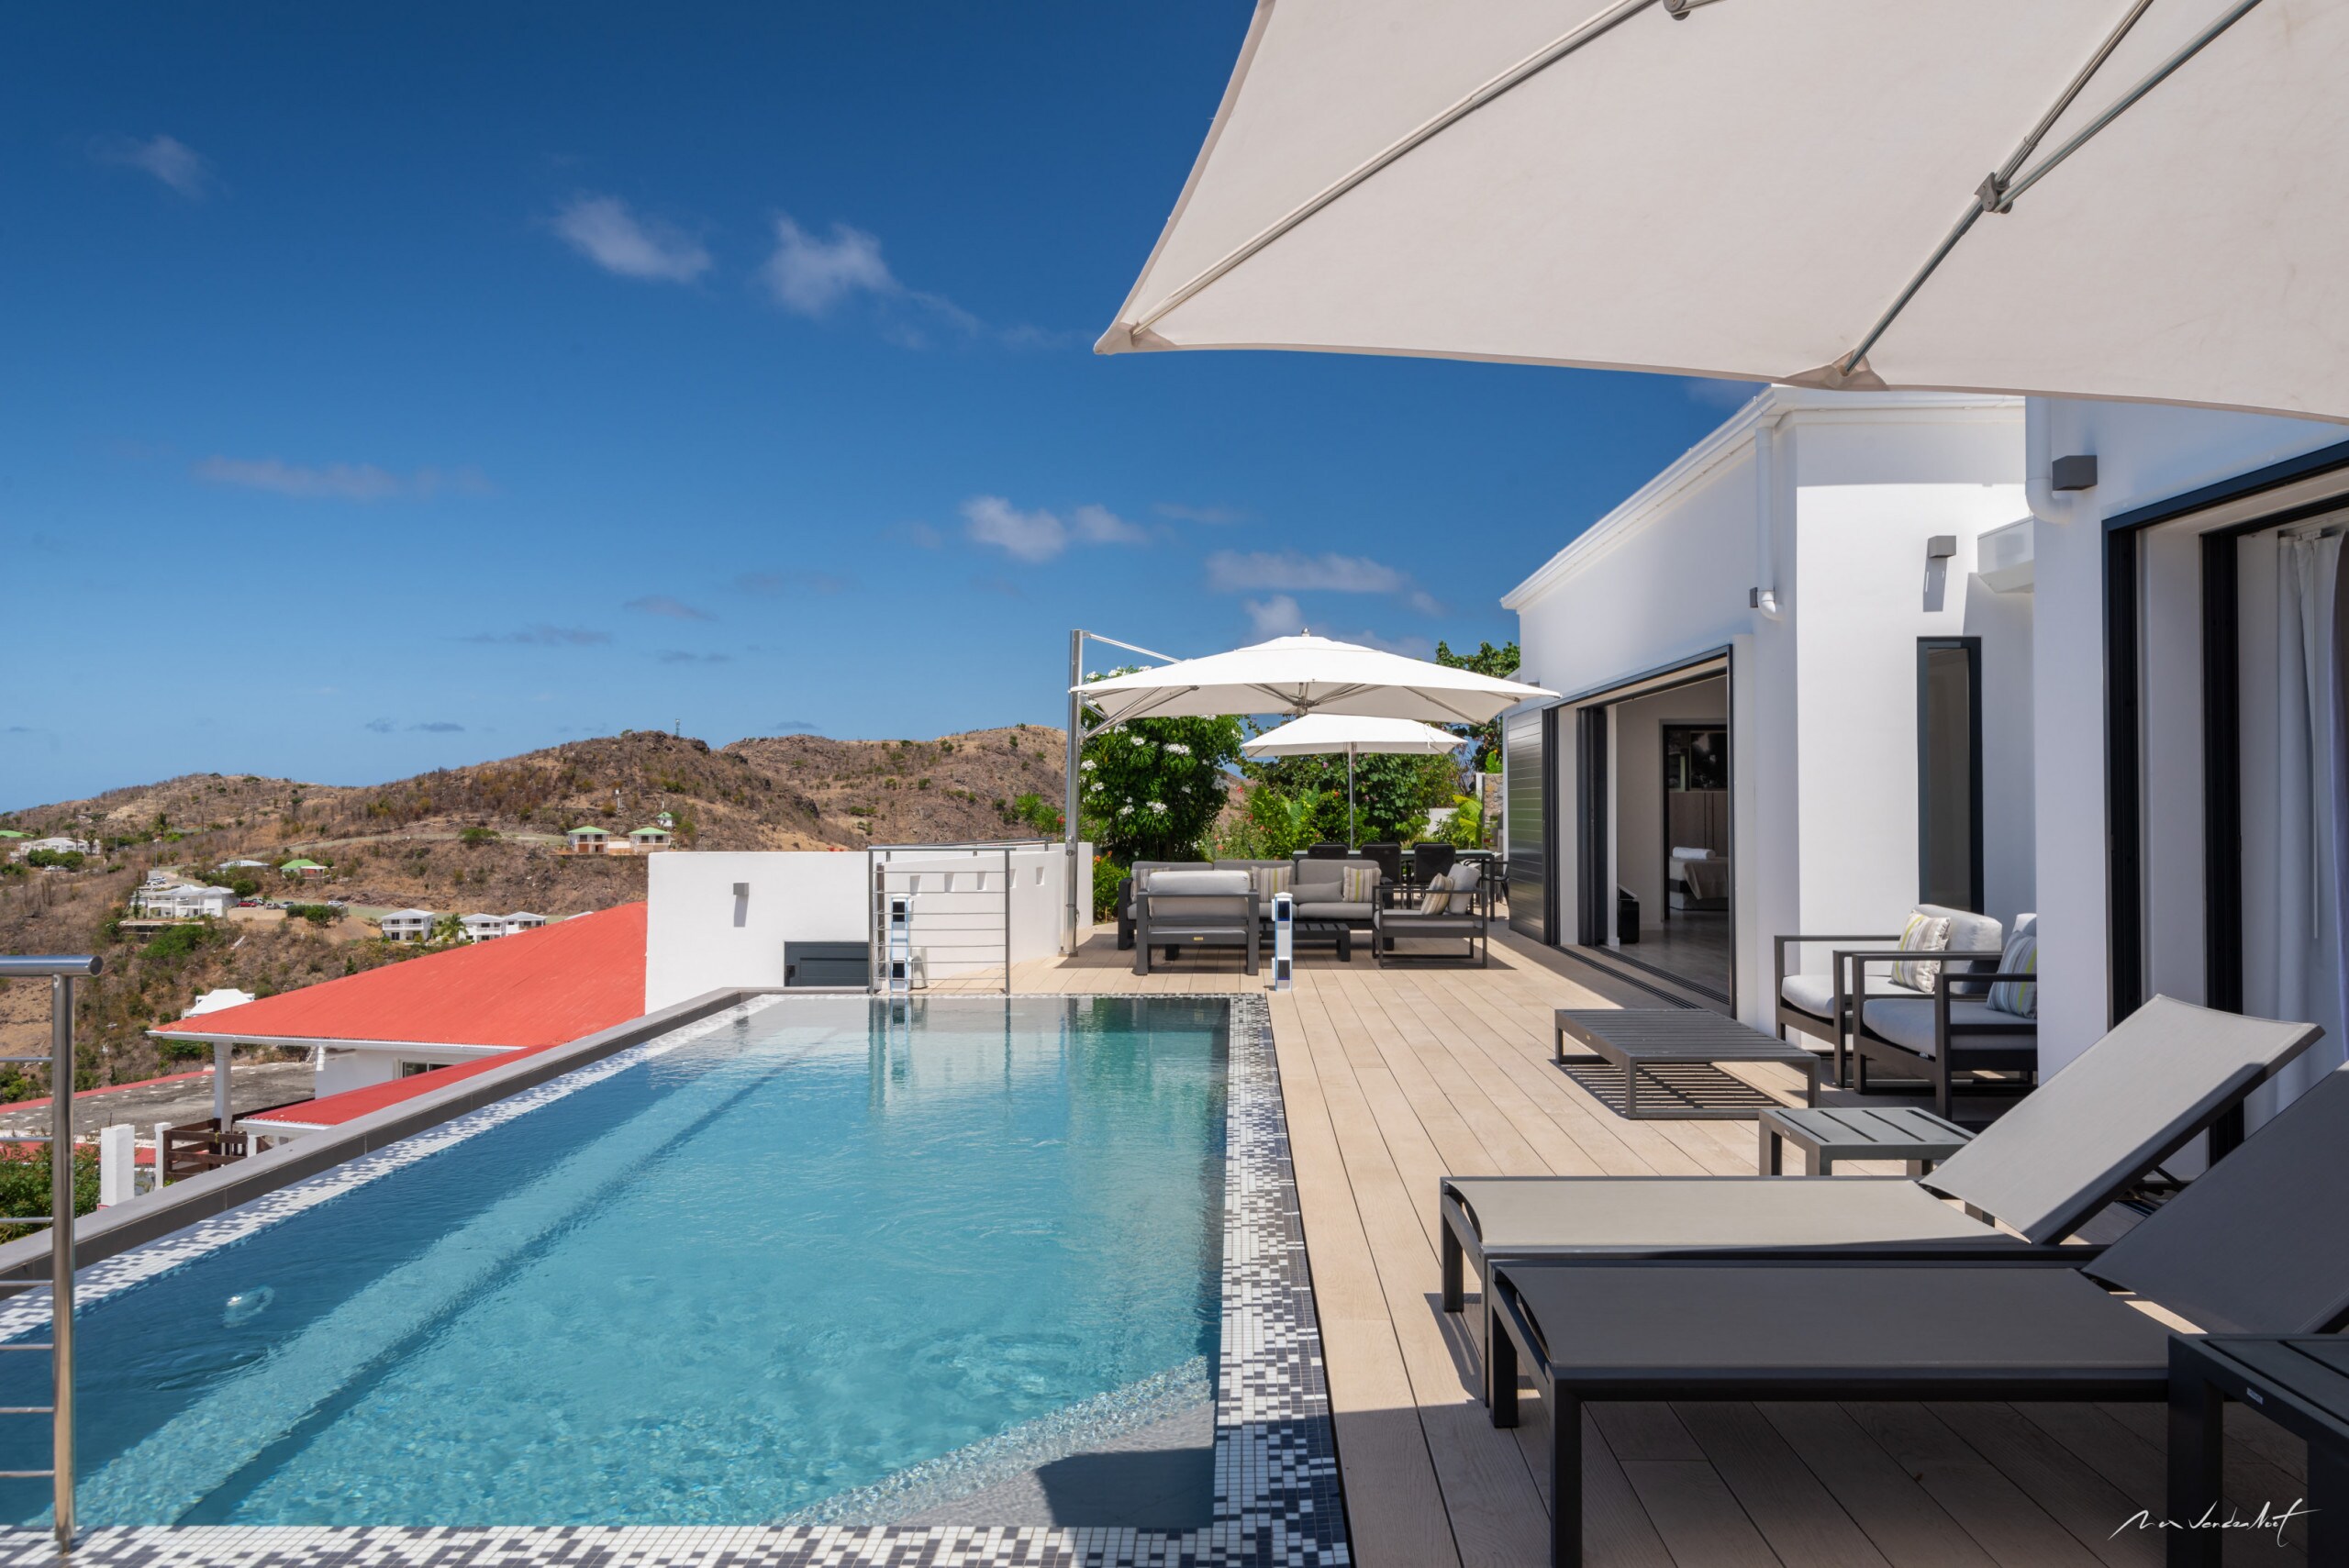 Beautiful heated pool facing the view. Large terrace with sun loungers and outdoor lounge area. Gas barbecue, outdoor shower.